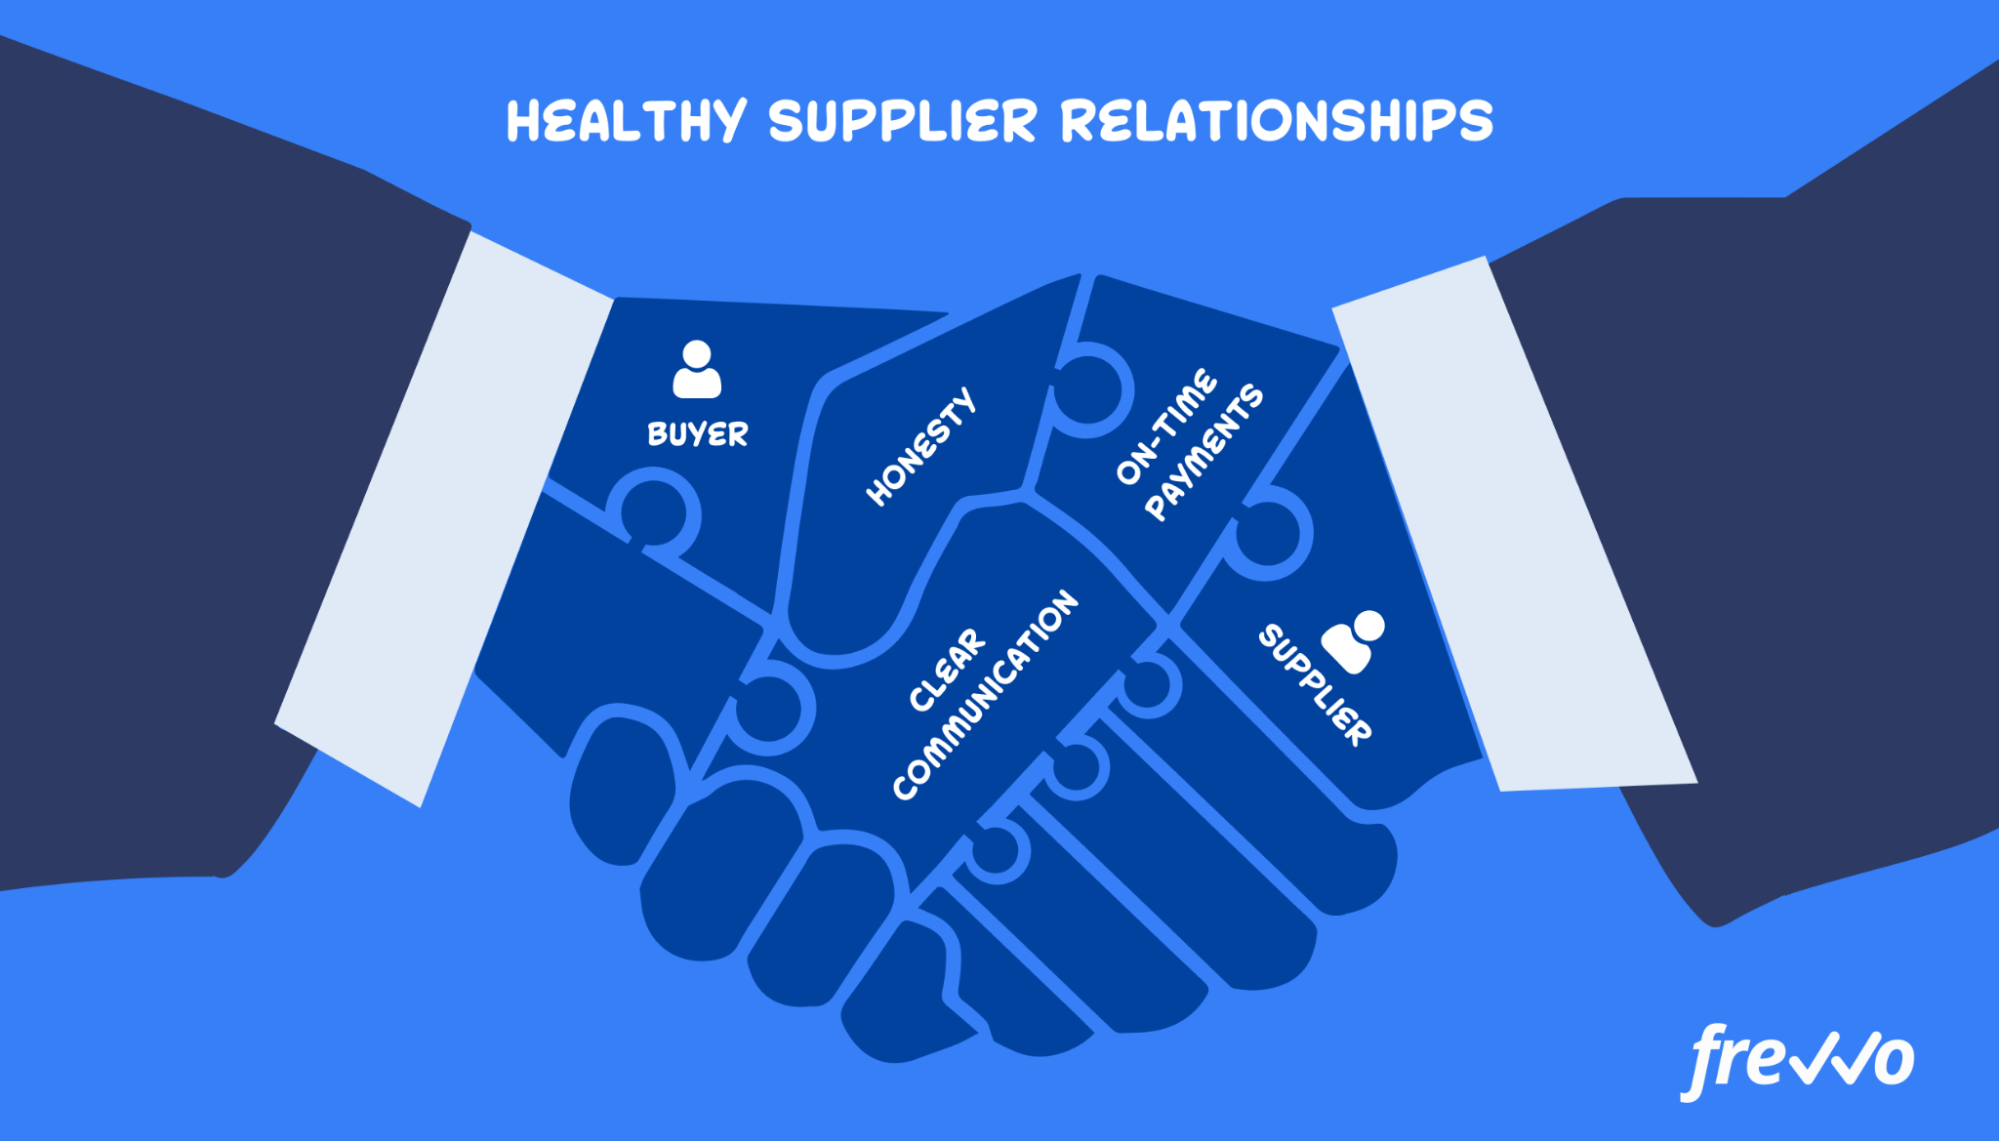 Graphic visualizing healthy supplier relationships